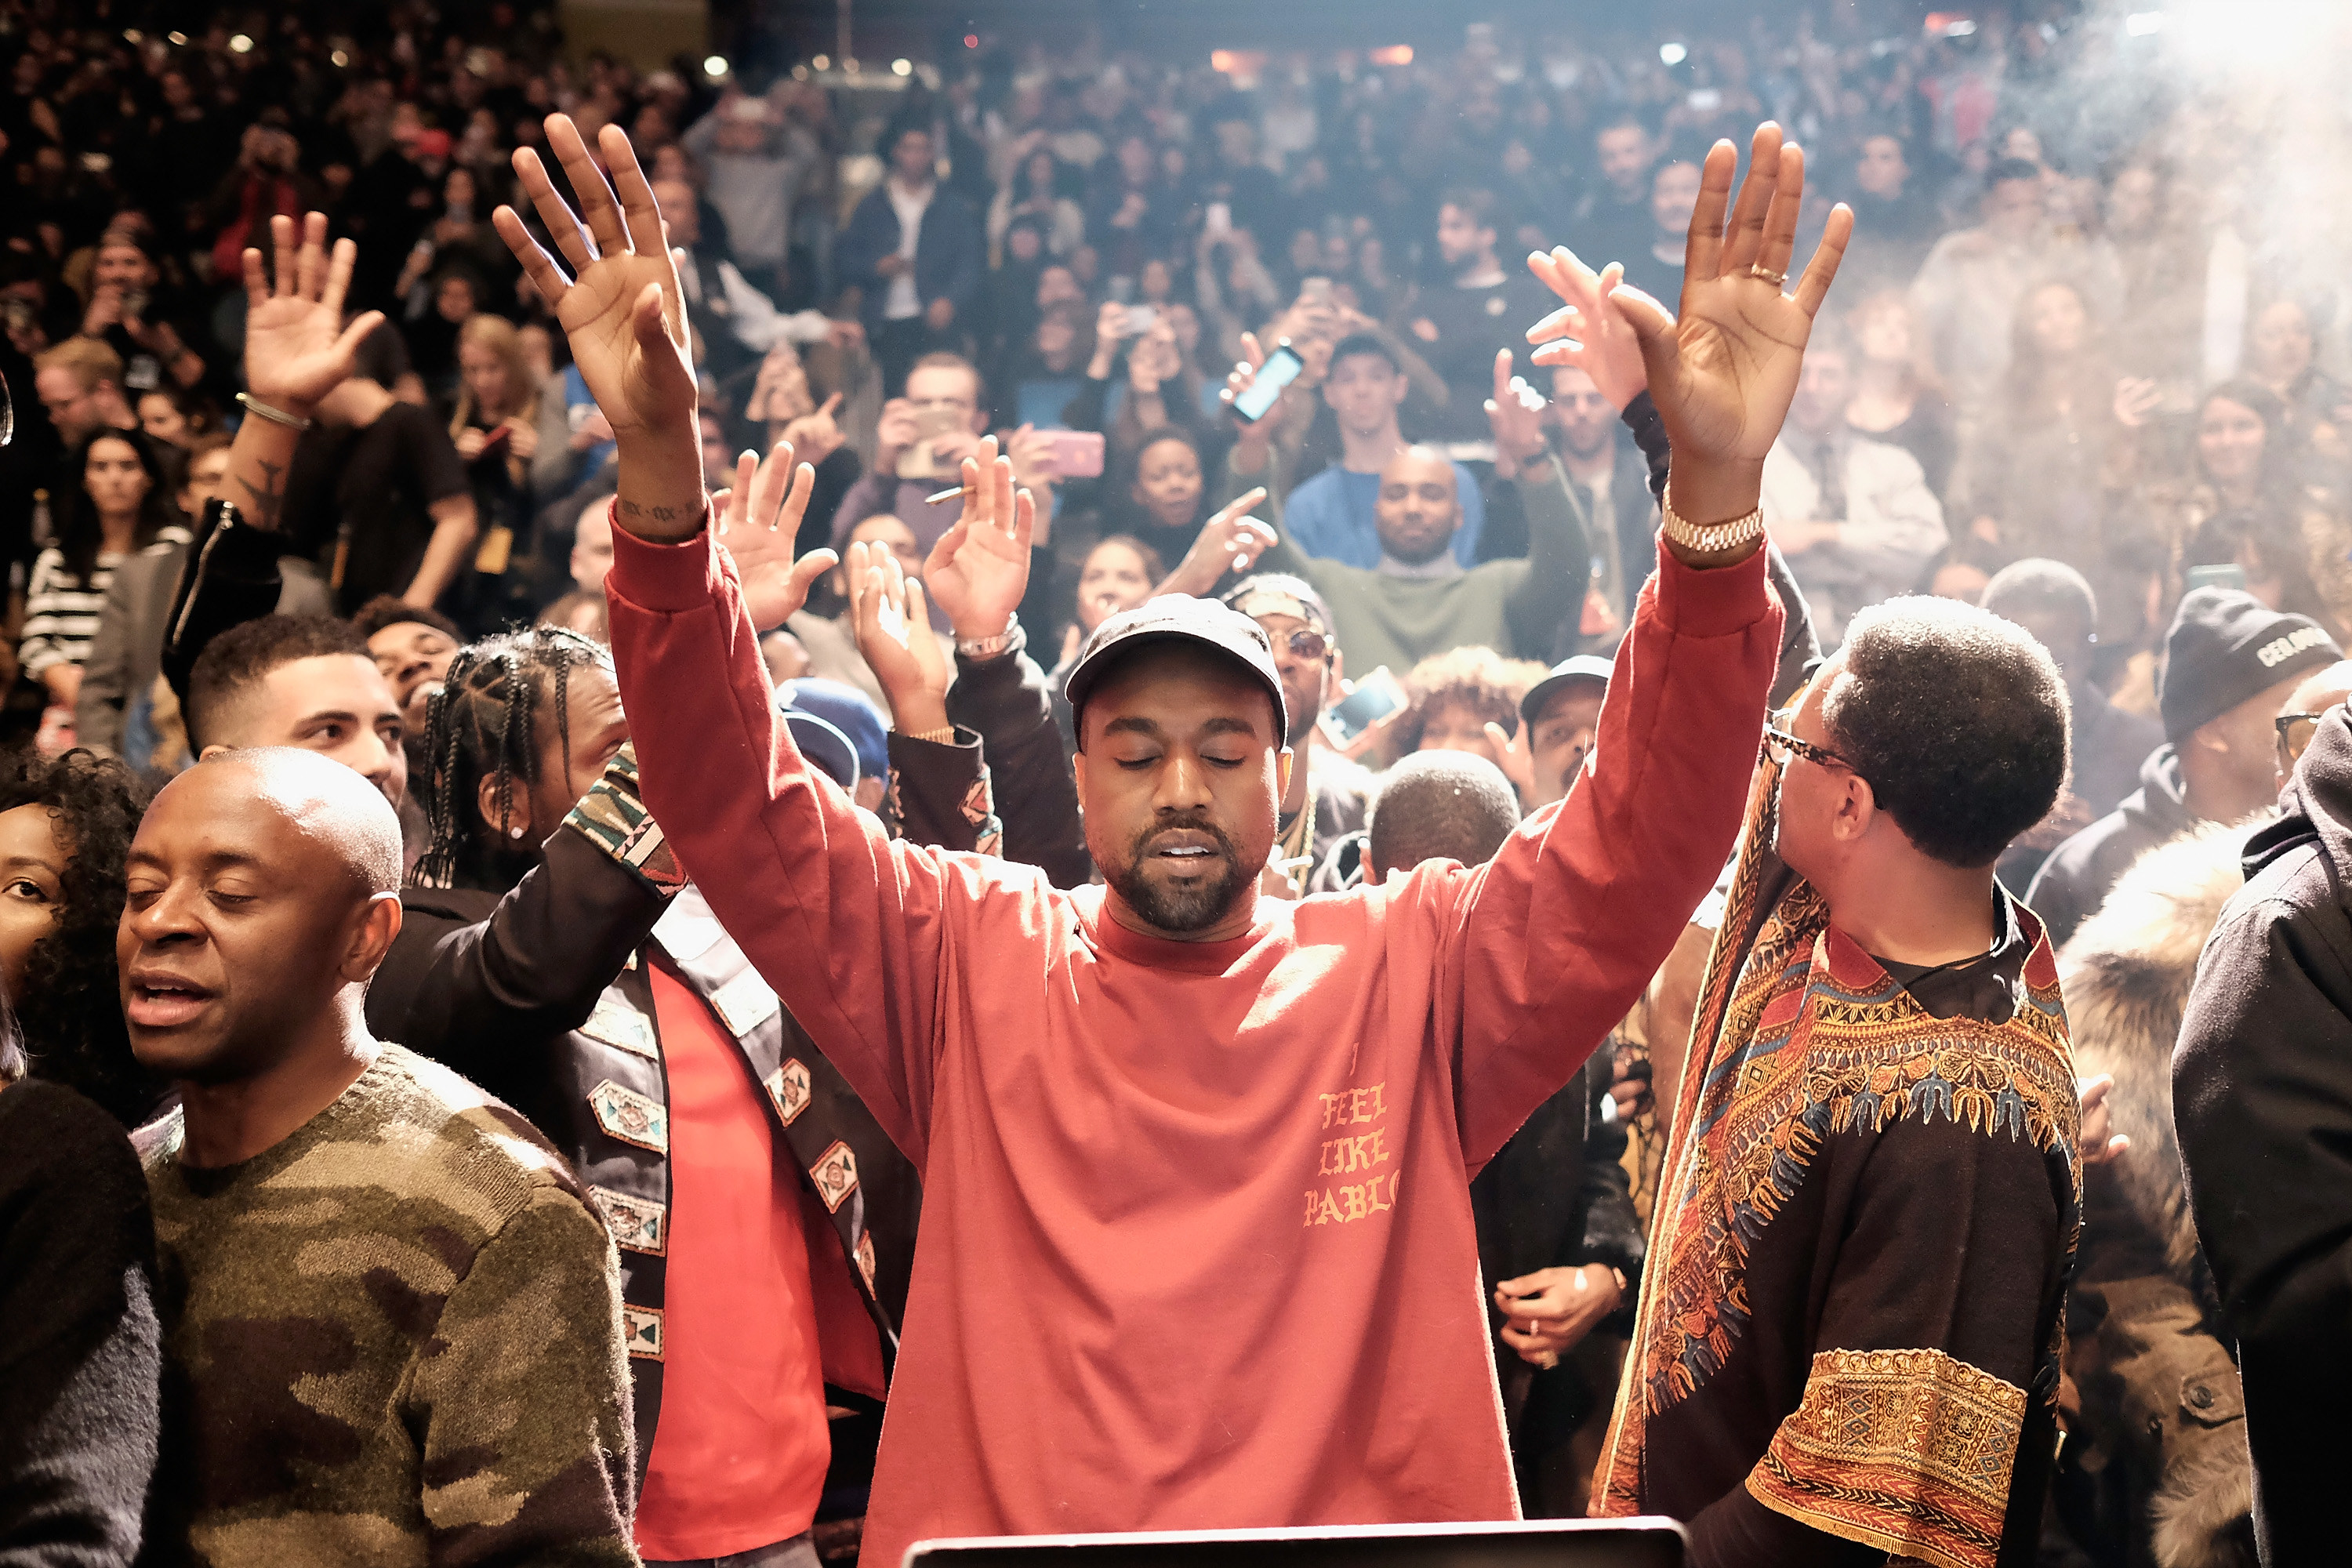 Kanye West's New Album Donda 2 Will Only Be Released On His $200